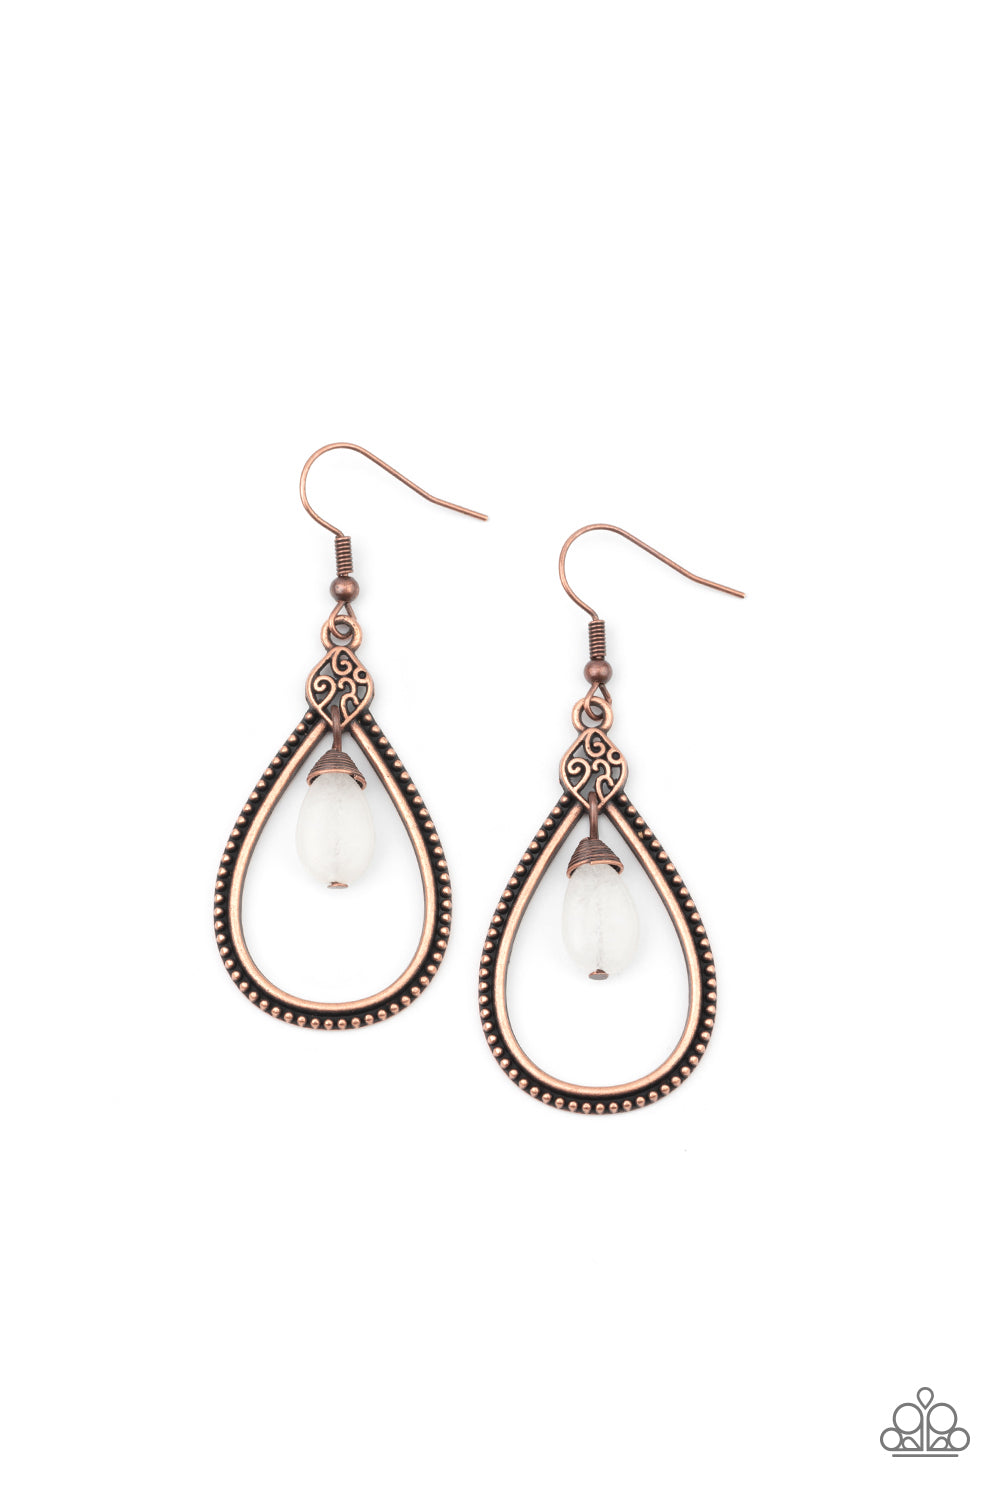 Featuring wire wrap detail, a dainty white stone swings from the top of a studded copper teardrop frame featuring filigree detail for a tranquil finish. Earring attaches to a standard fishhook fitting